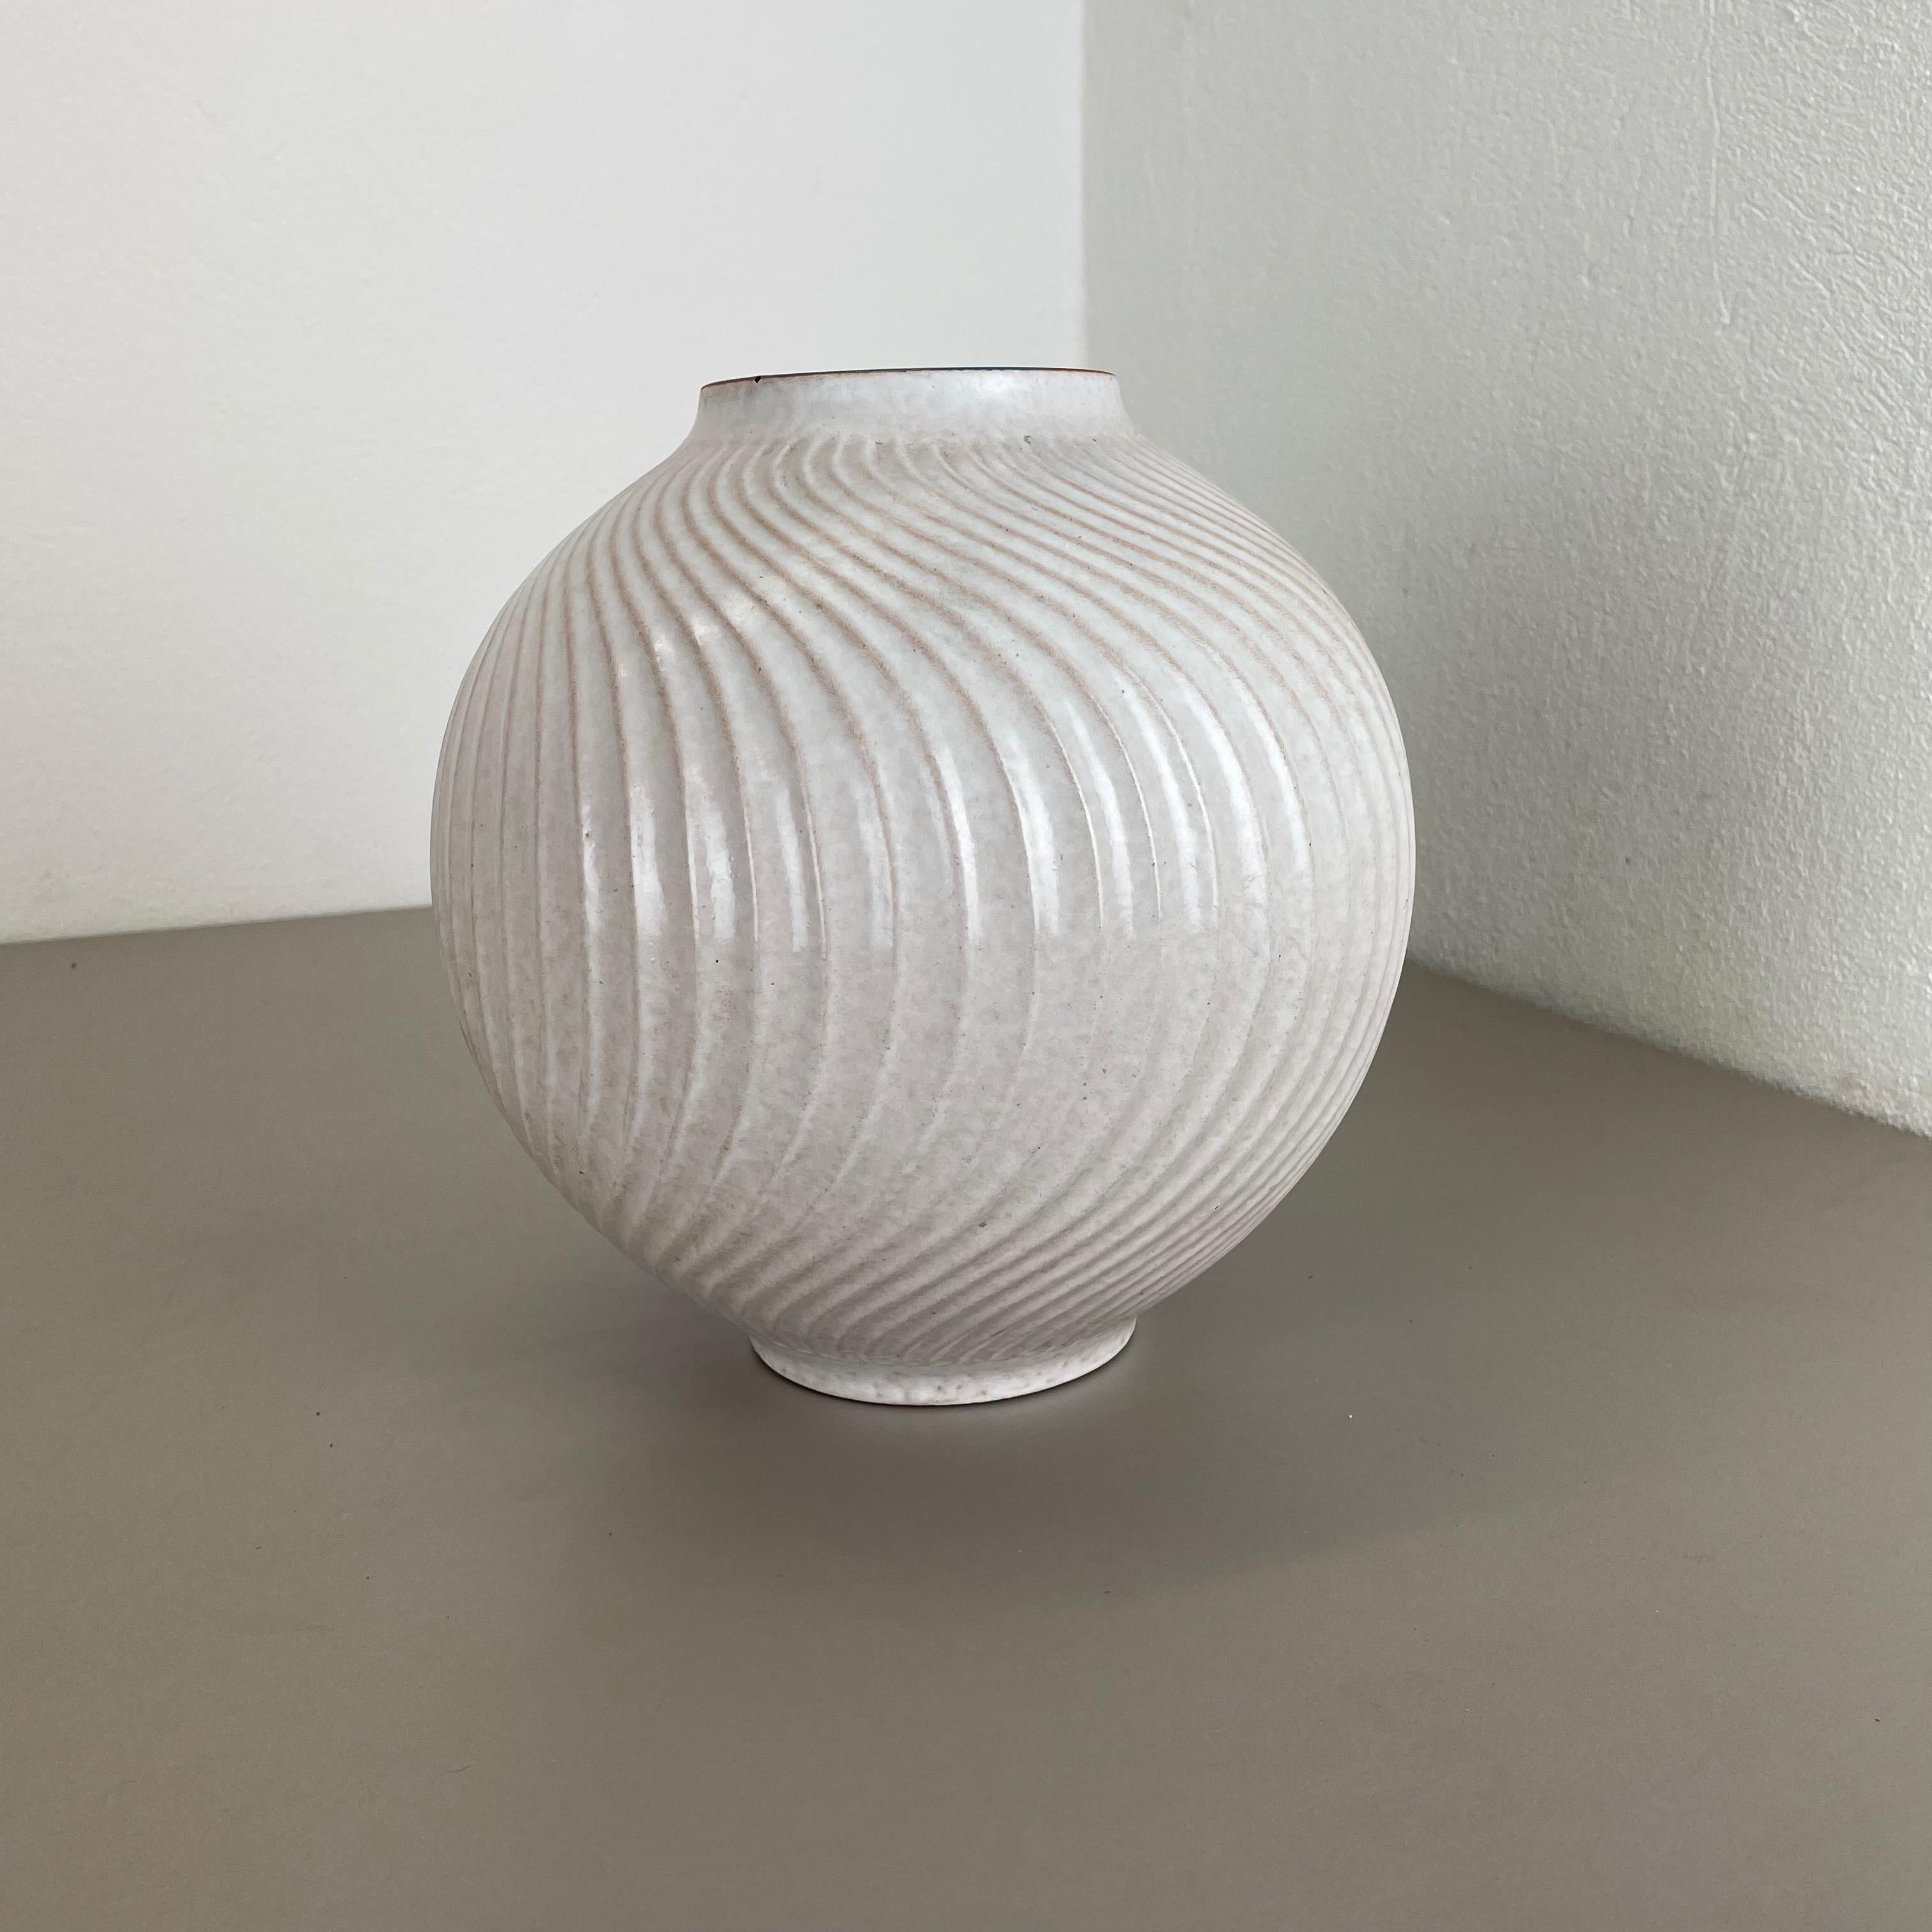 Article:

Pottery ceramic vase


Producer:

Scheurich Ceramic, Germany



Decade:

1970s



Description:

Original vintage 1970s pottery ceramic vase made in Germany. High quality German production with a nice abstract swirl